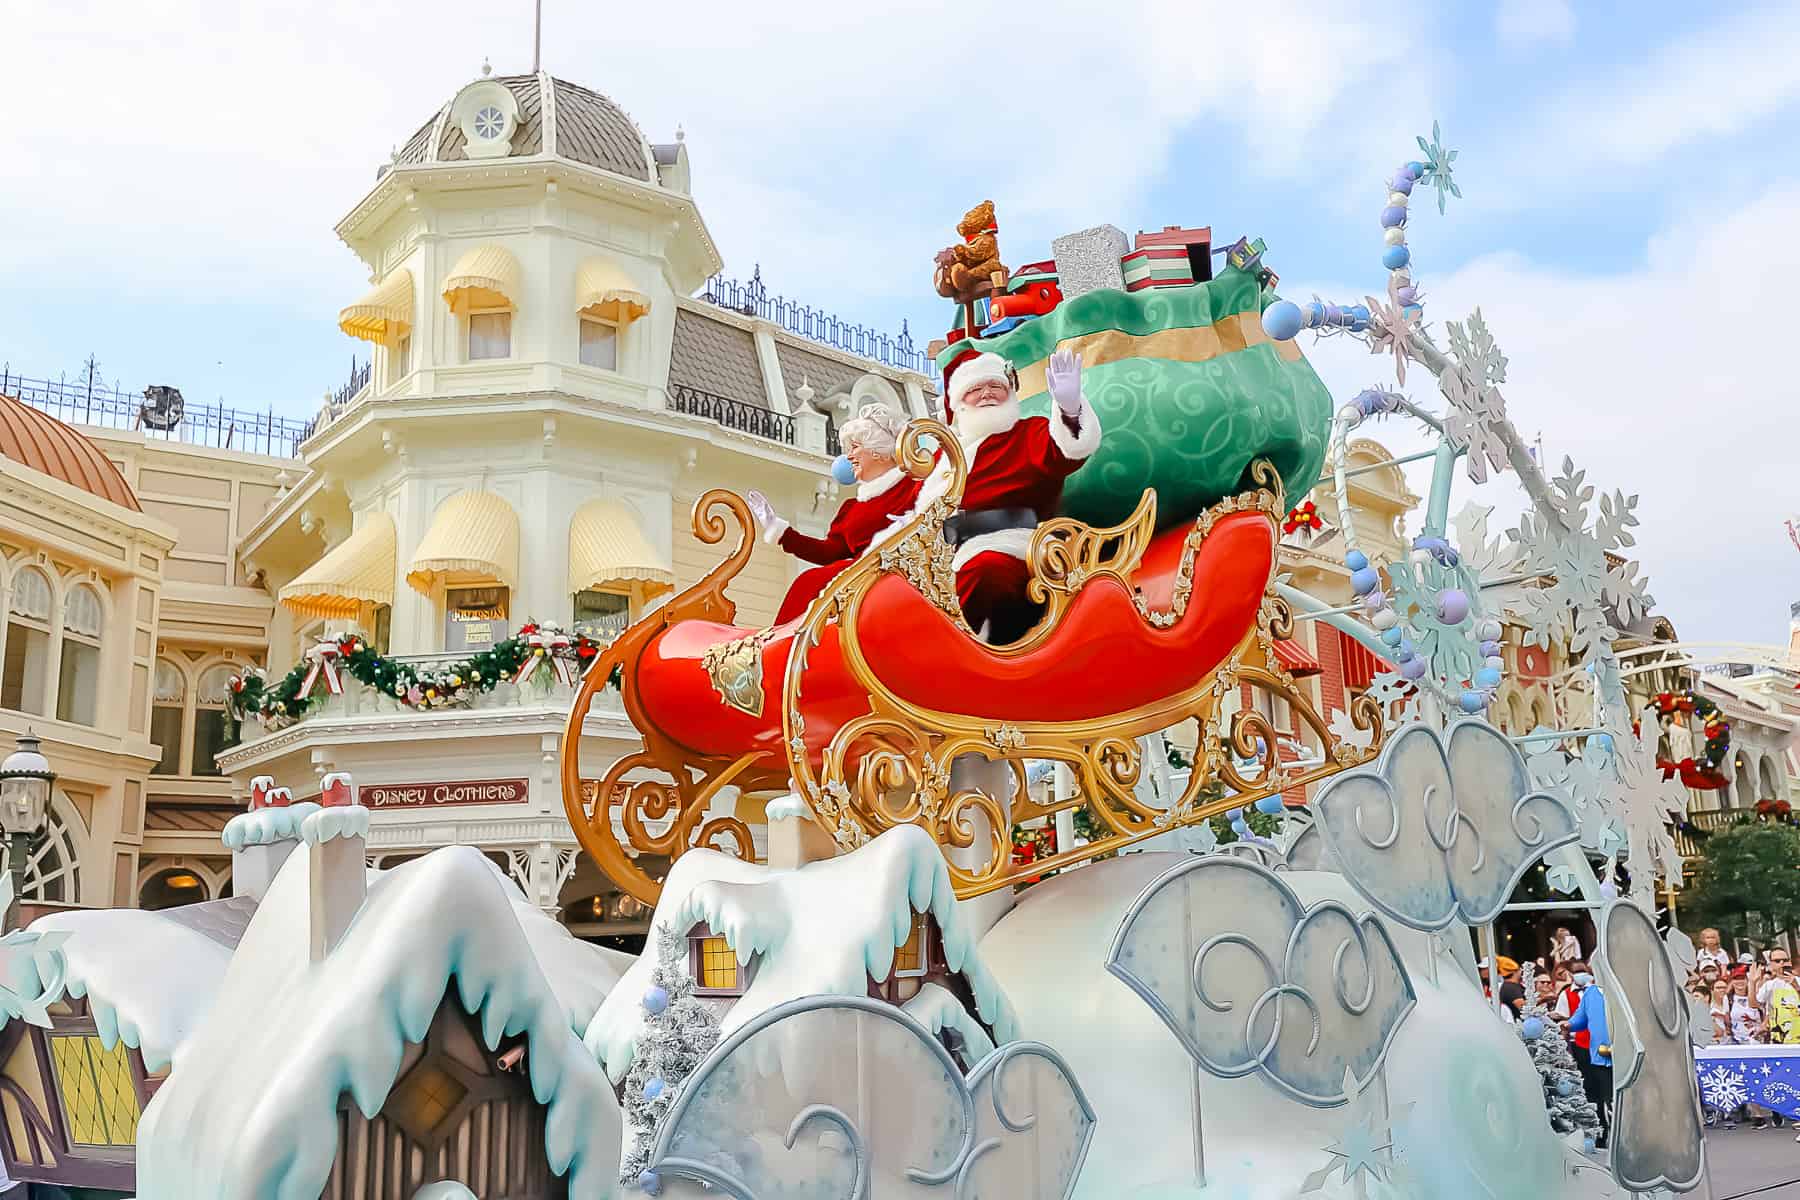 Close up of Santa and Mrs. Claus in the sleigh. A large sack of toys sits behind them. 